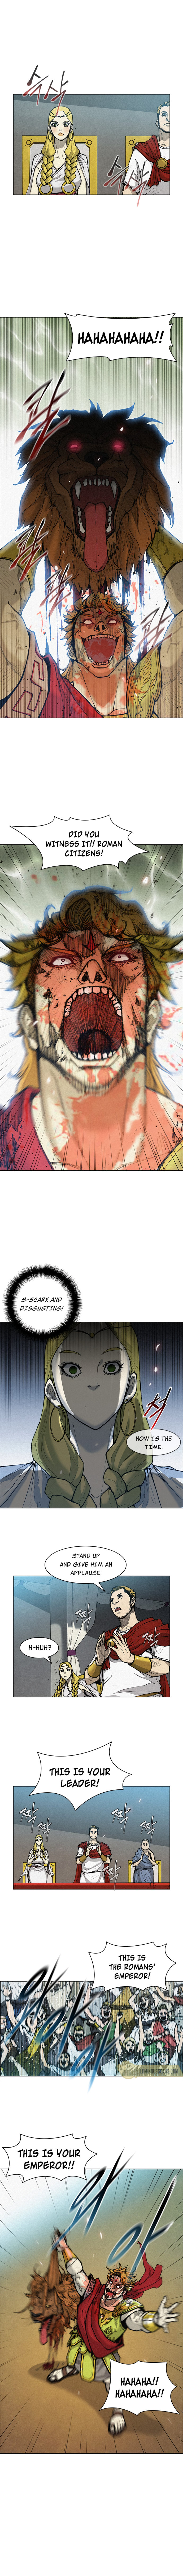 Long Way of the Warrior - Chapter 16 Page 7